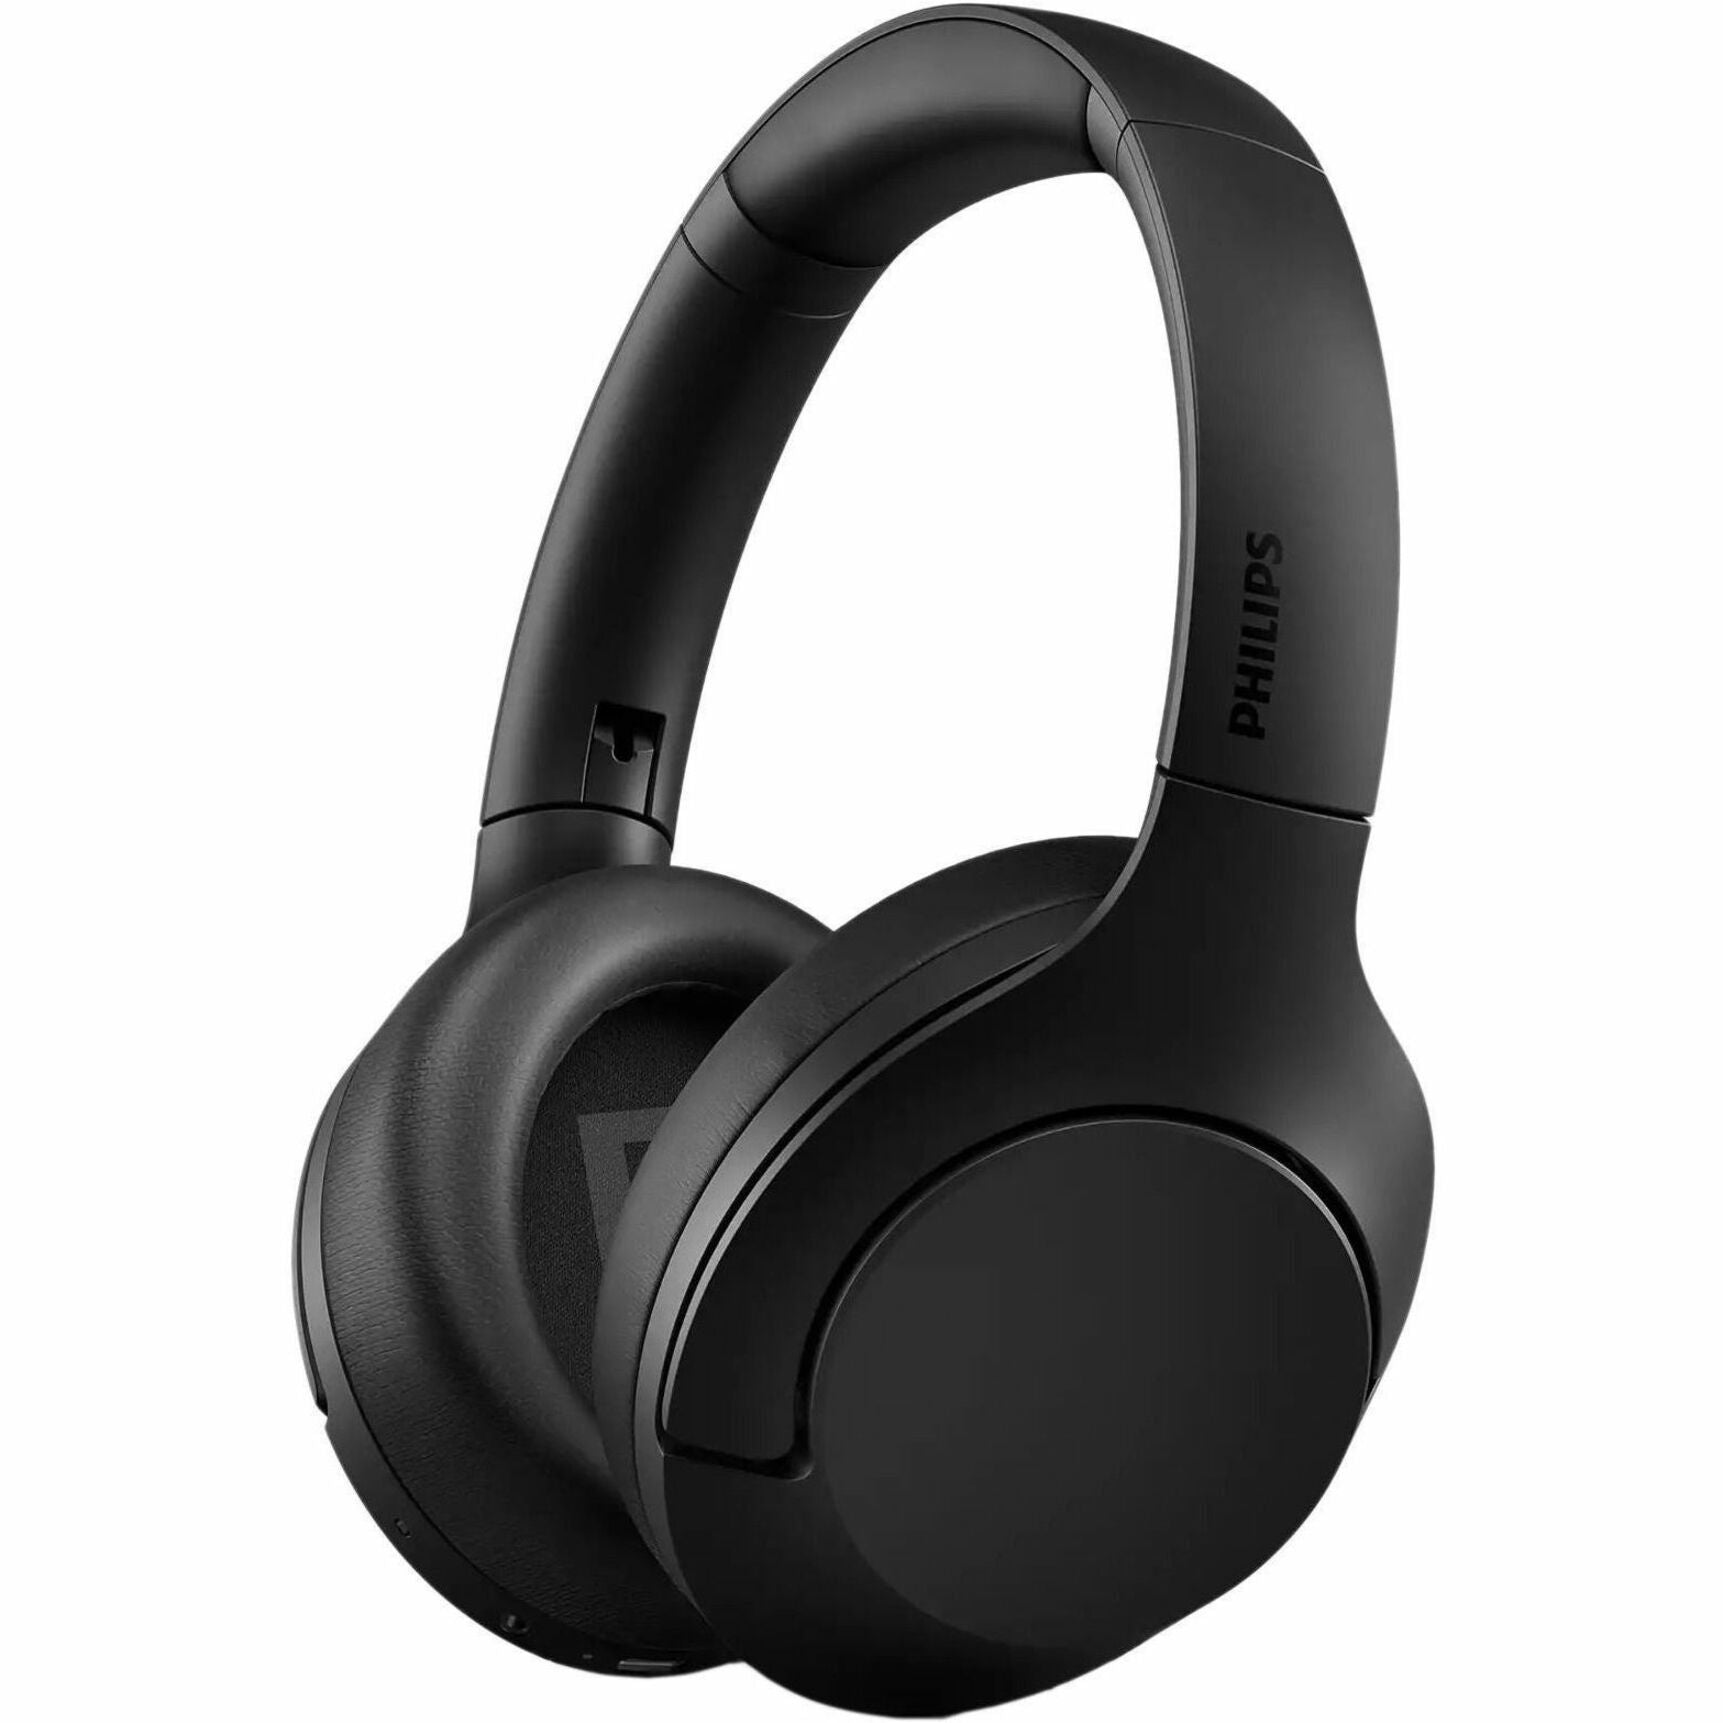 Philips TAH8506BK/00 Wireless Headphone, Active Noise Canceling, Bluetooth 5.0, Lightweight, Foldable